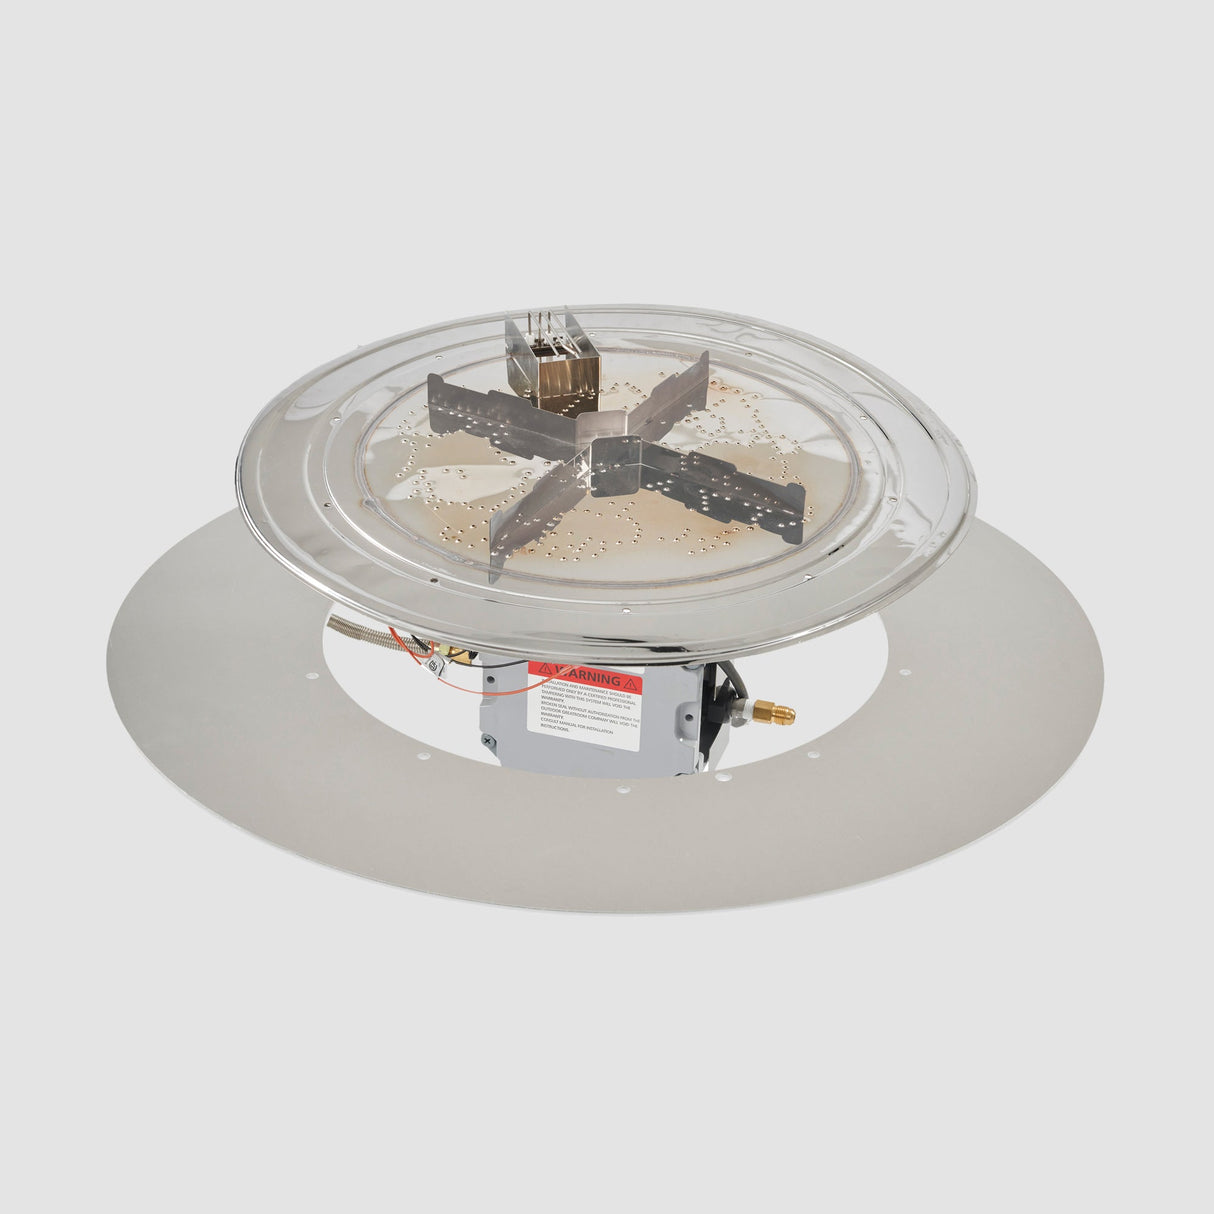 The 36" Crystal Fire Plus Round Gas Burner Insert and Plate Kit with Direct Spark Ignition stacked together